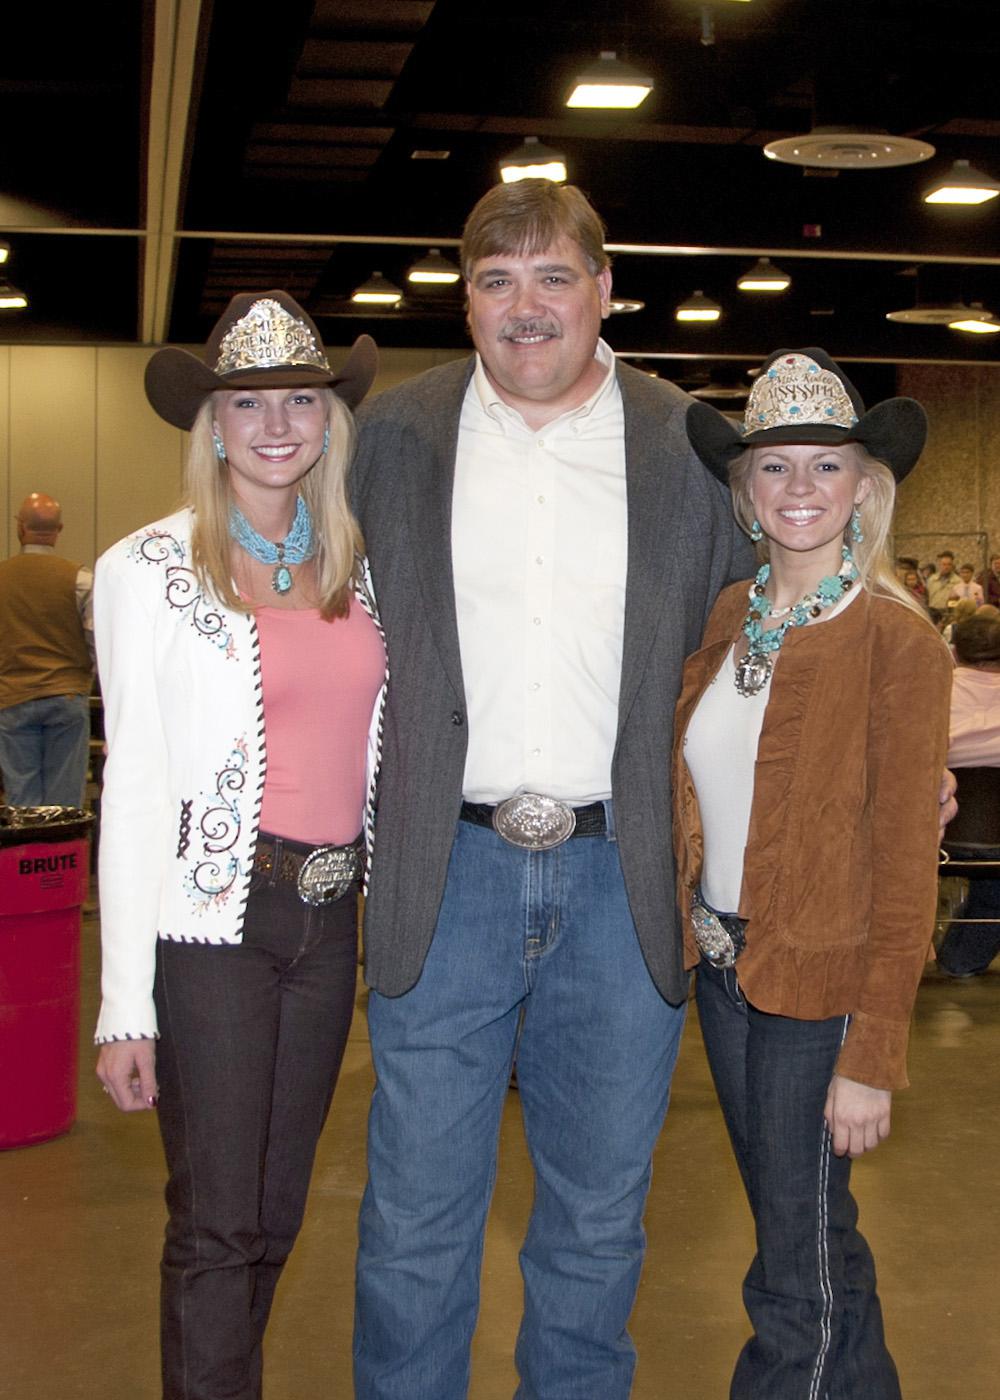 Miss Dixie National Paige Nicholson and Miss Mississippi Rodeo Samantha Golden joined Mississippi State University Extension Service director Gary Jackson at the 2012 Dixie National Sale of Junior Champions to support youth development and agriculture. (Photo by Kat Lawrence)